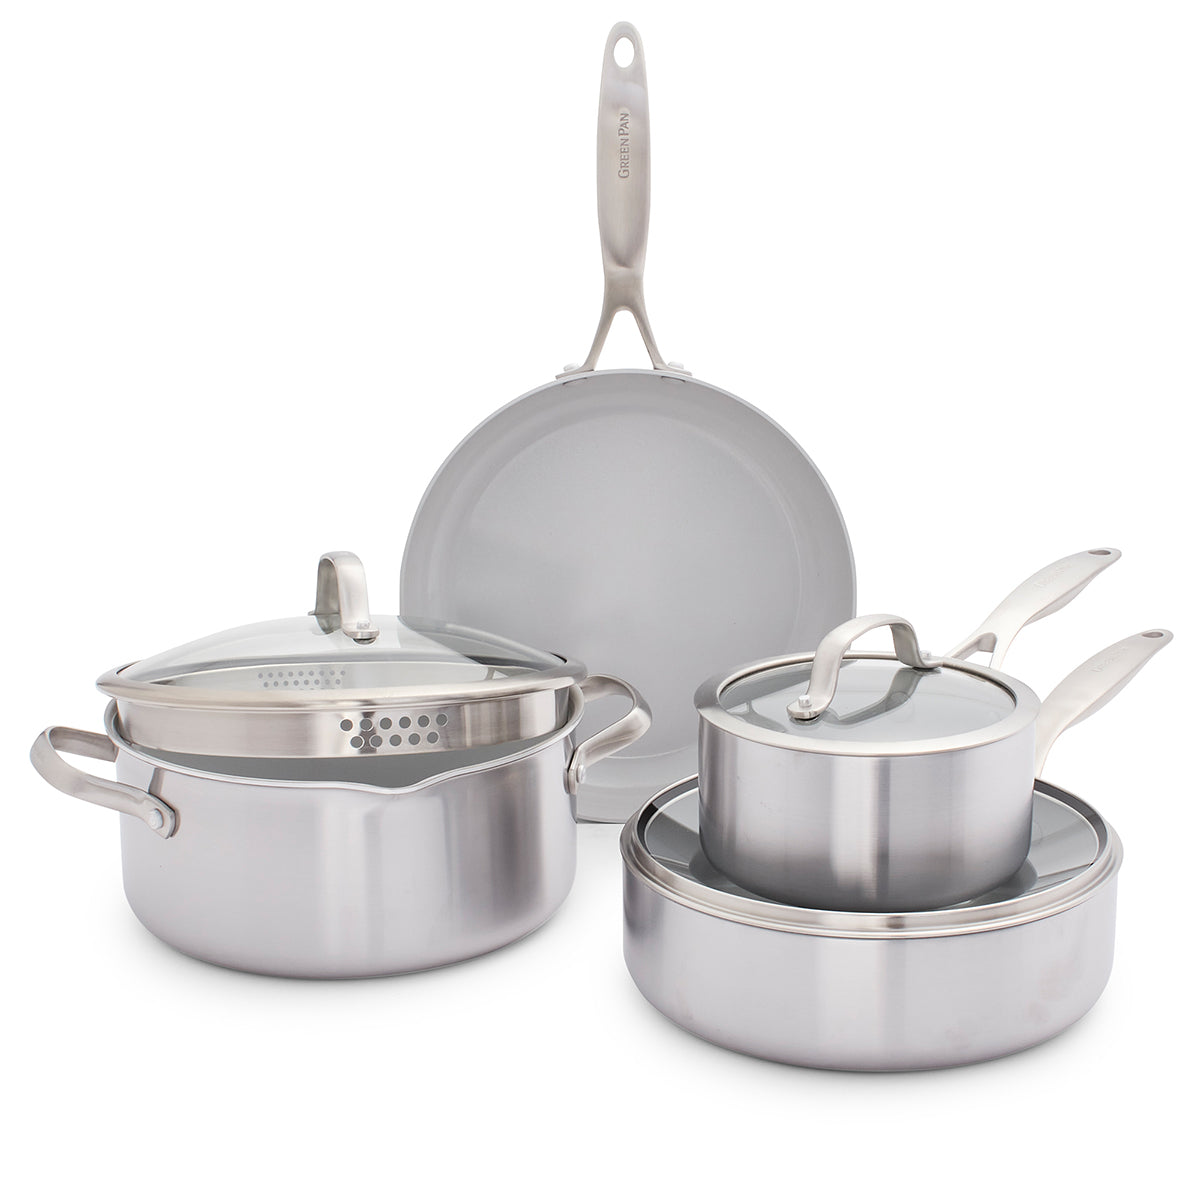  7-Piece Stainless Steel Induction Ready Cookware Set